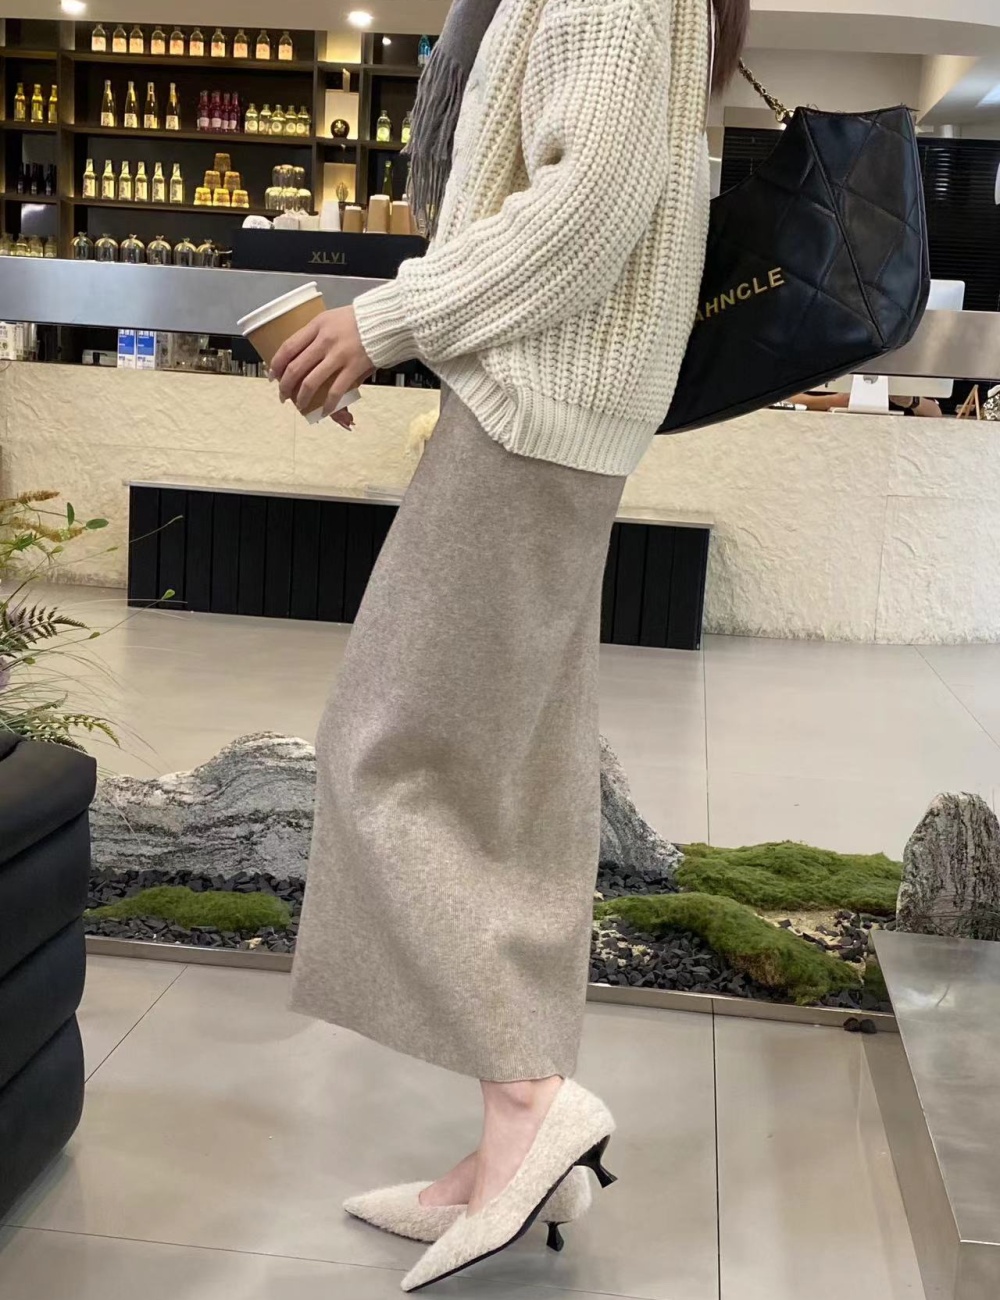 Knitted long package hip after the split skirt for women